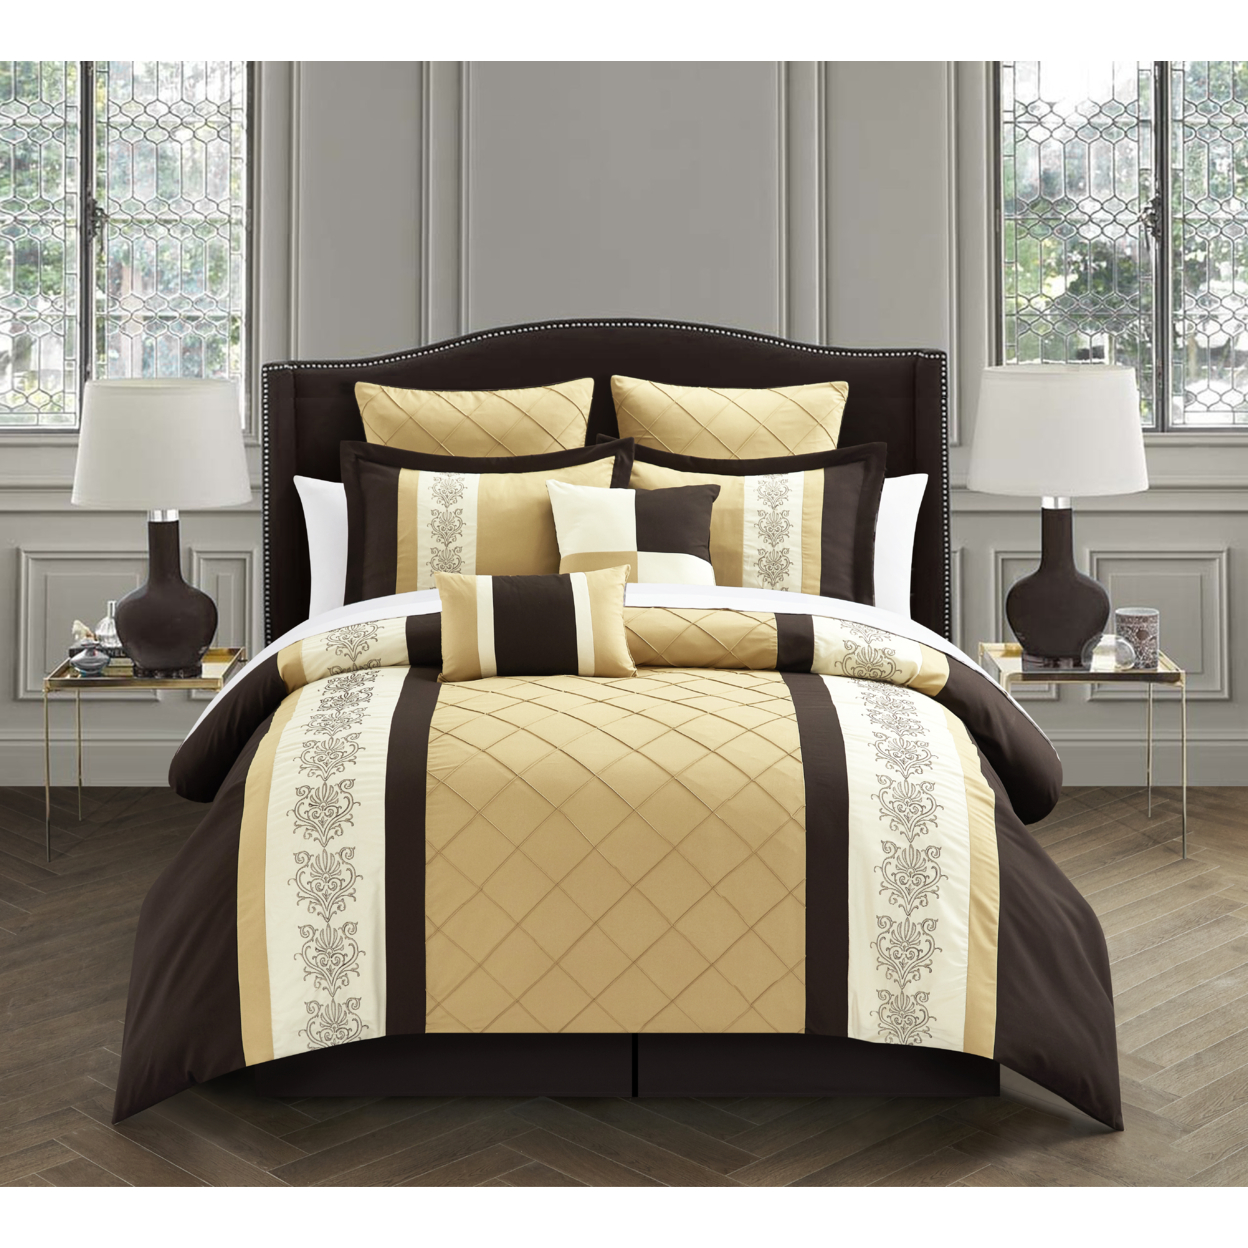 Livingston Oversized And Overfilled Comforter Set (8-Piece) - Gold, Queen